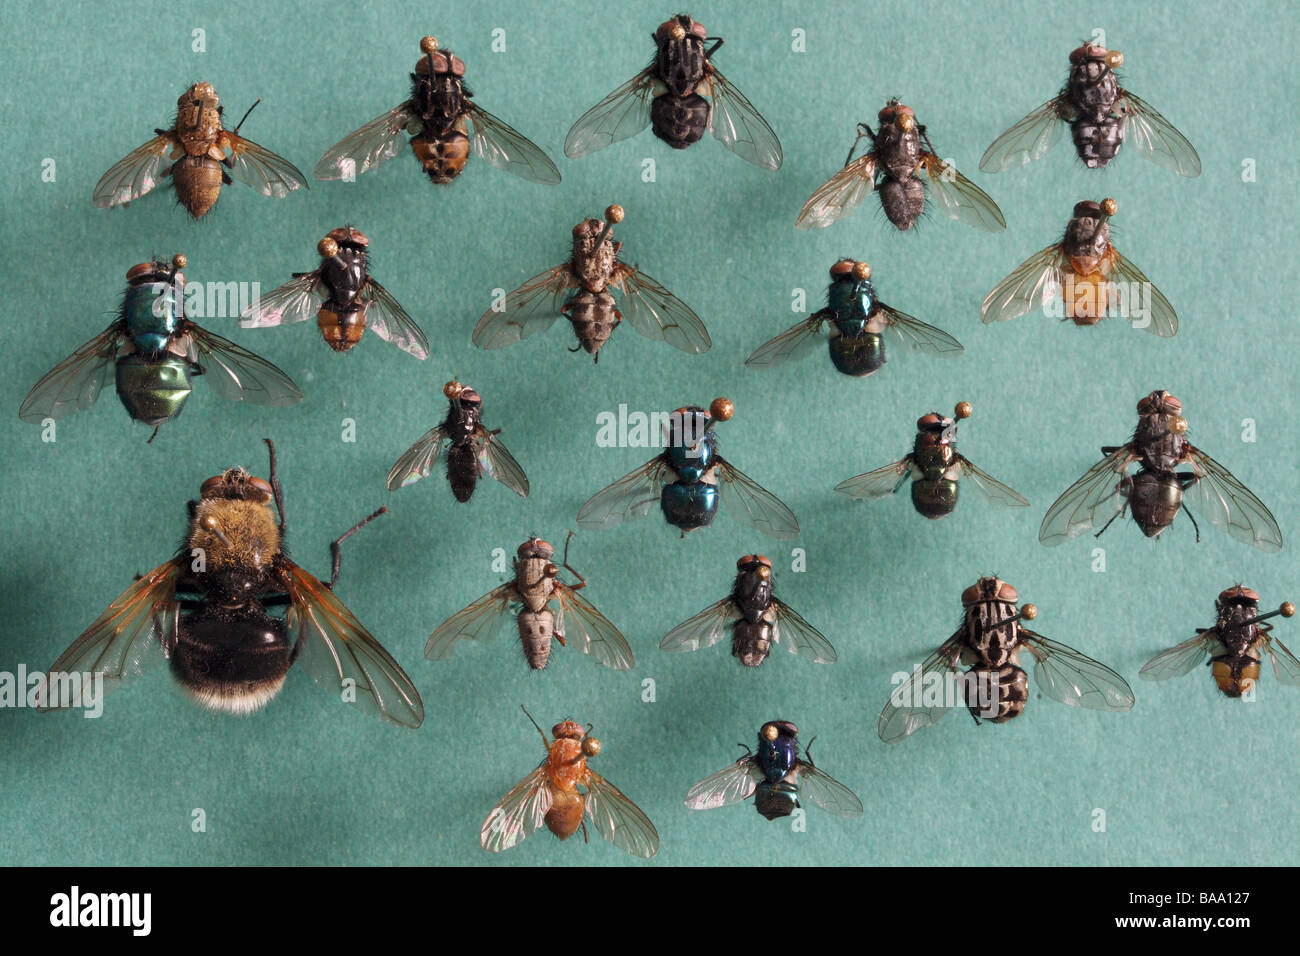 Houseflies different kinds close-up Stock Photo